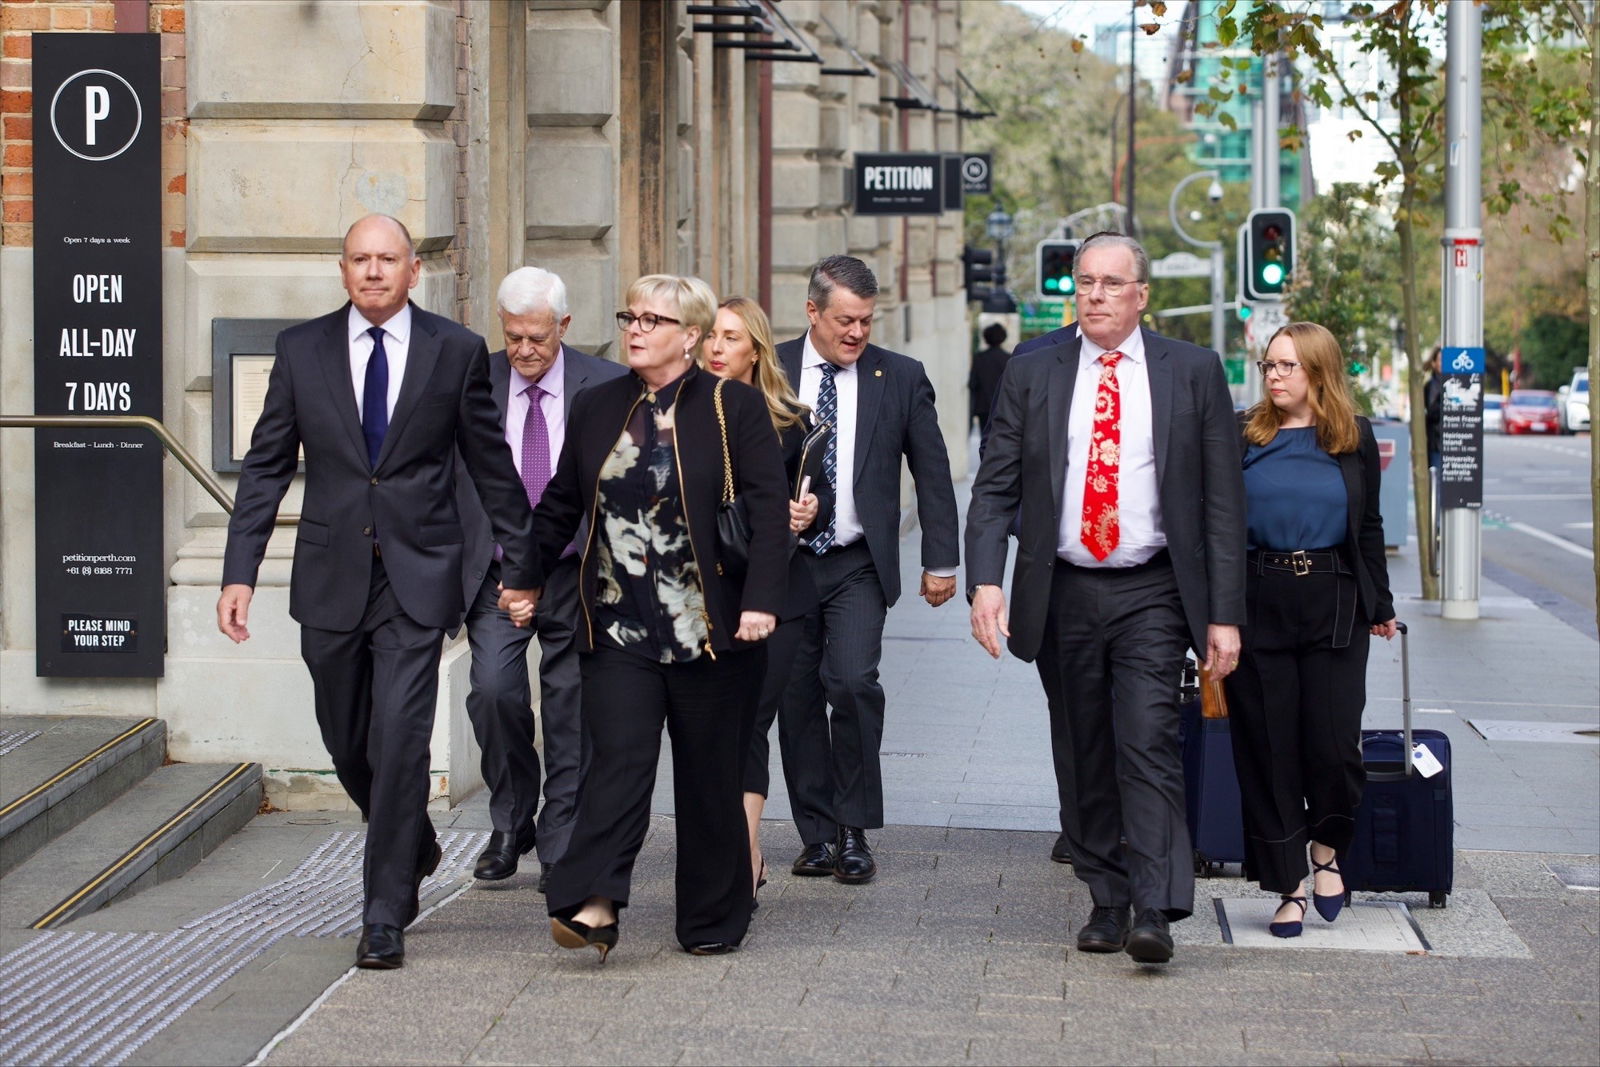 A group of people in suits walks down a CBD footpath